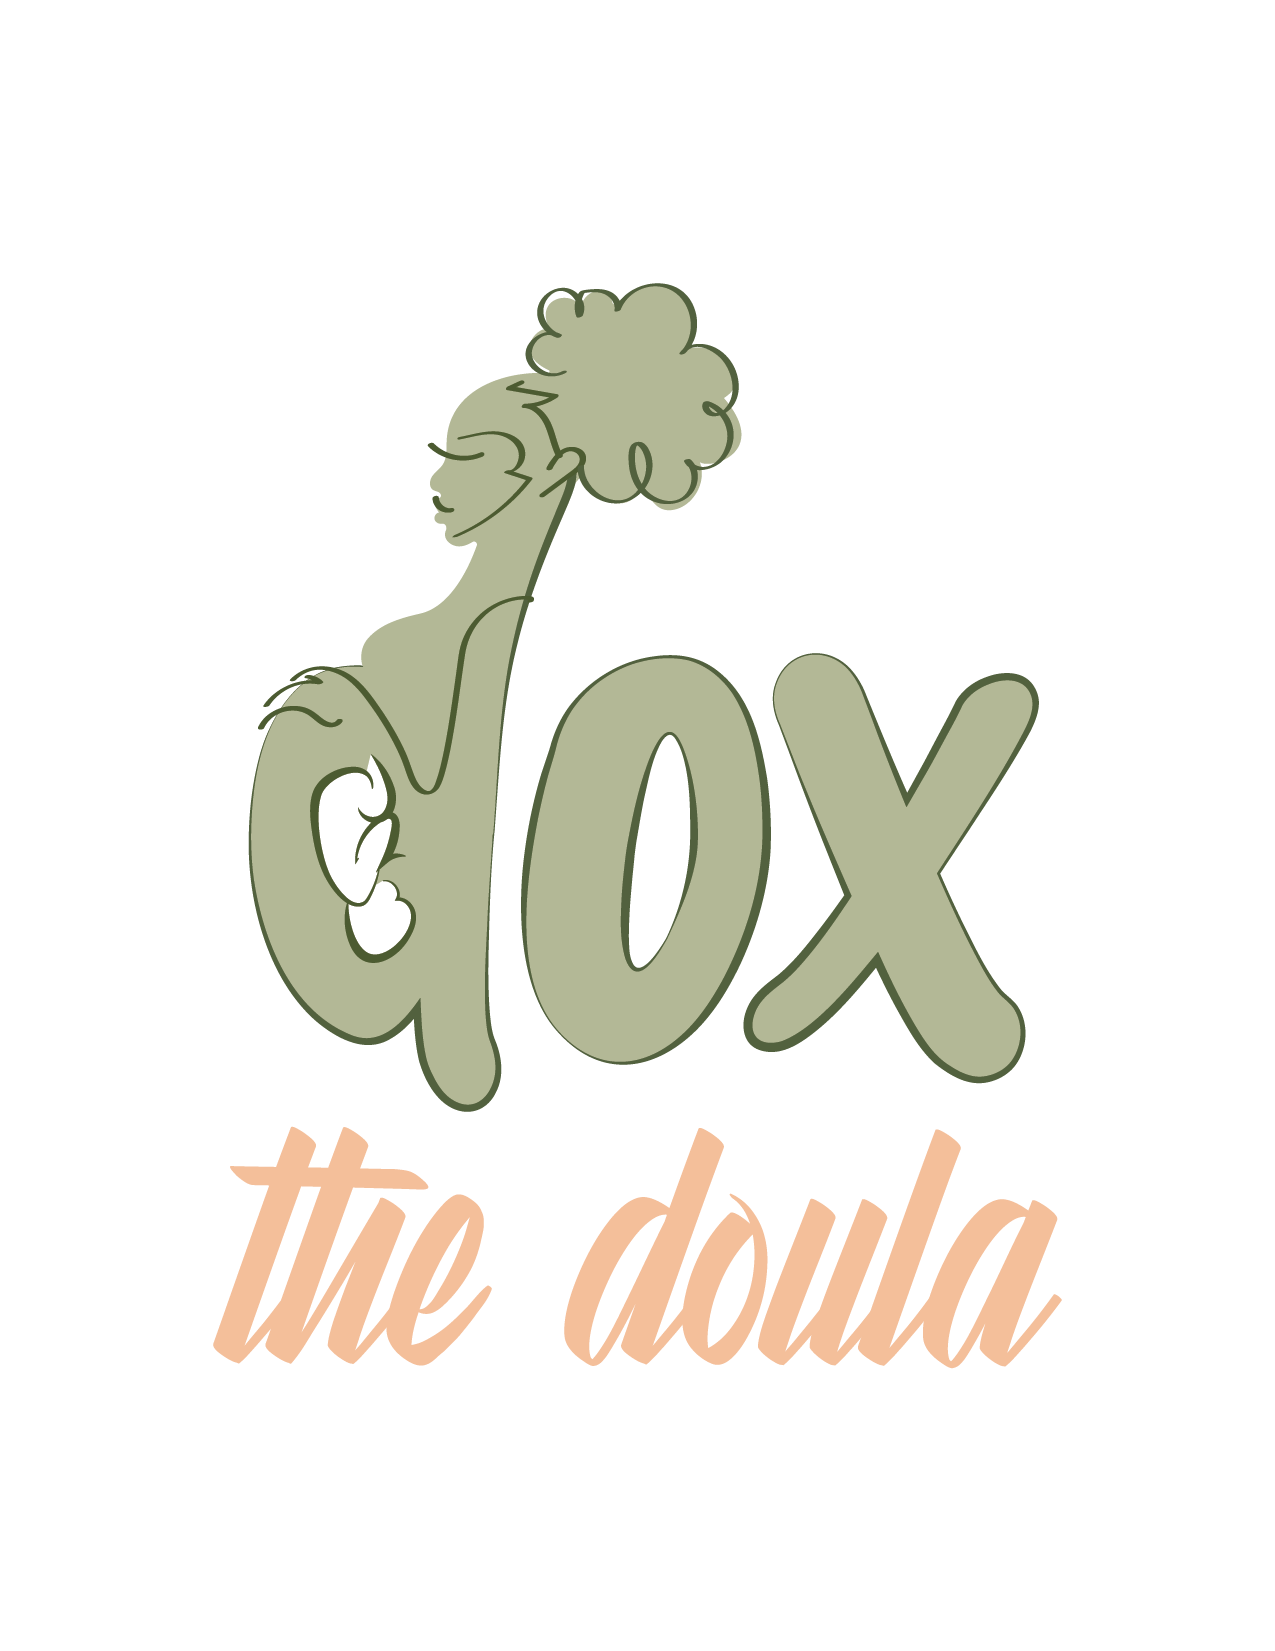 Dox the Doula